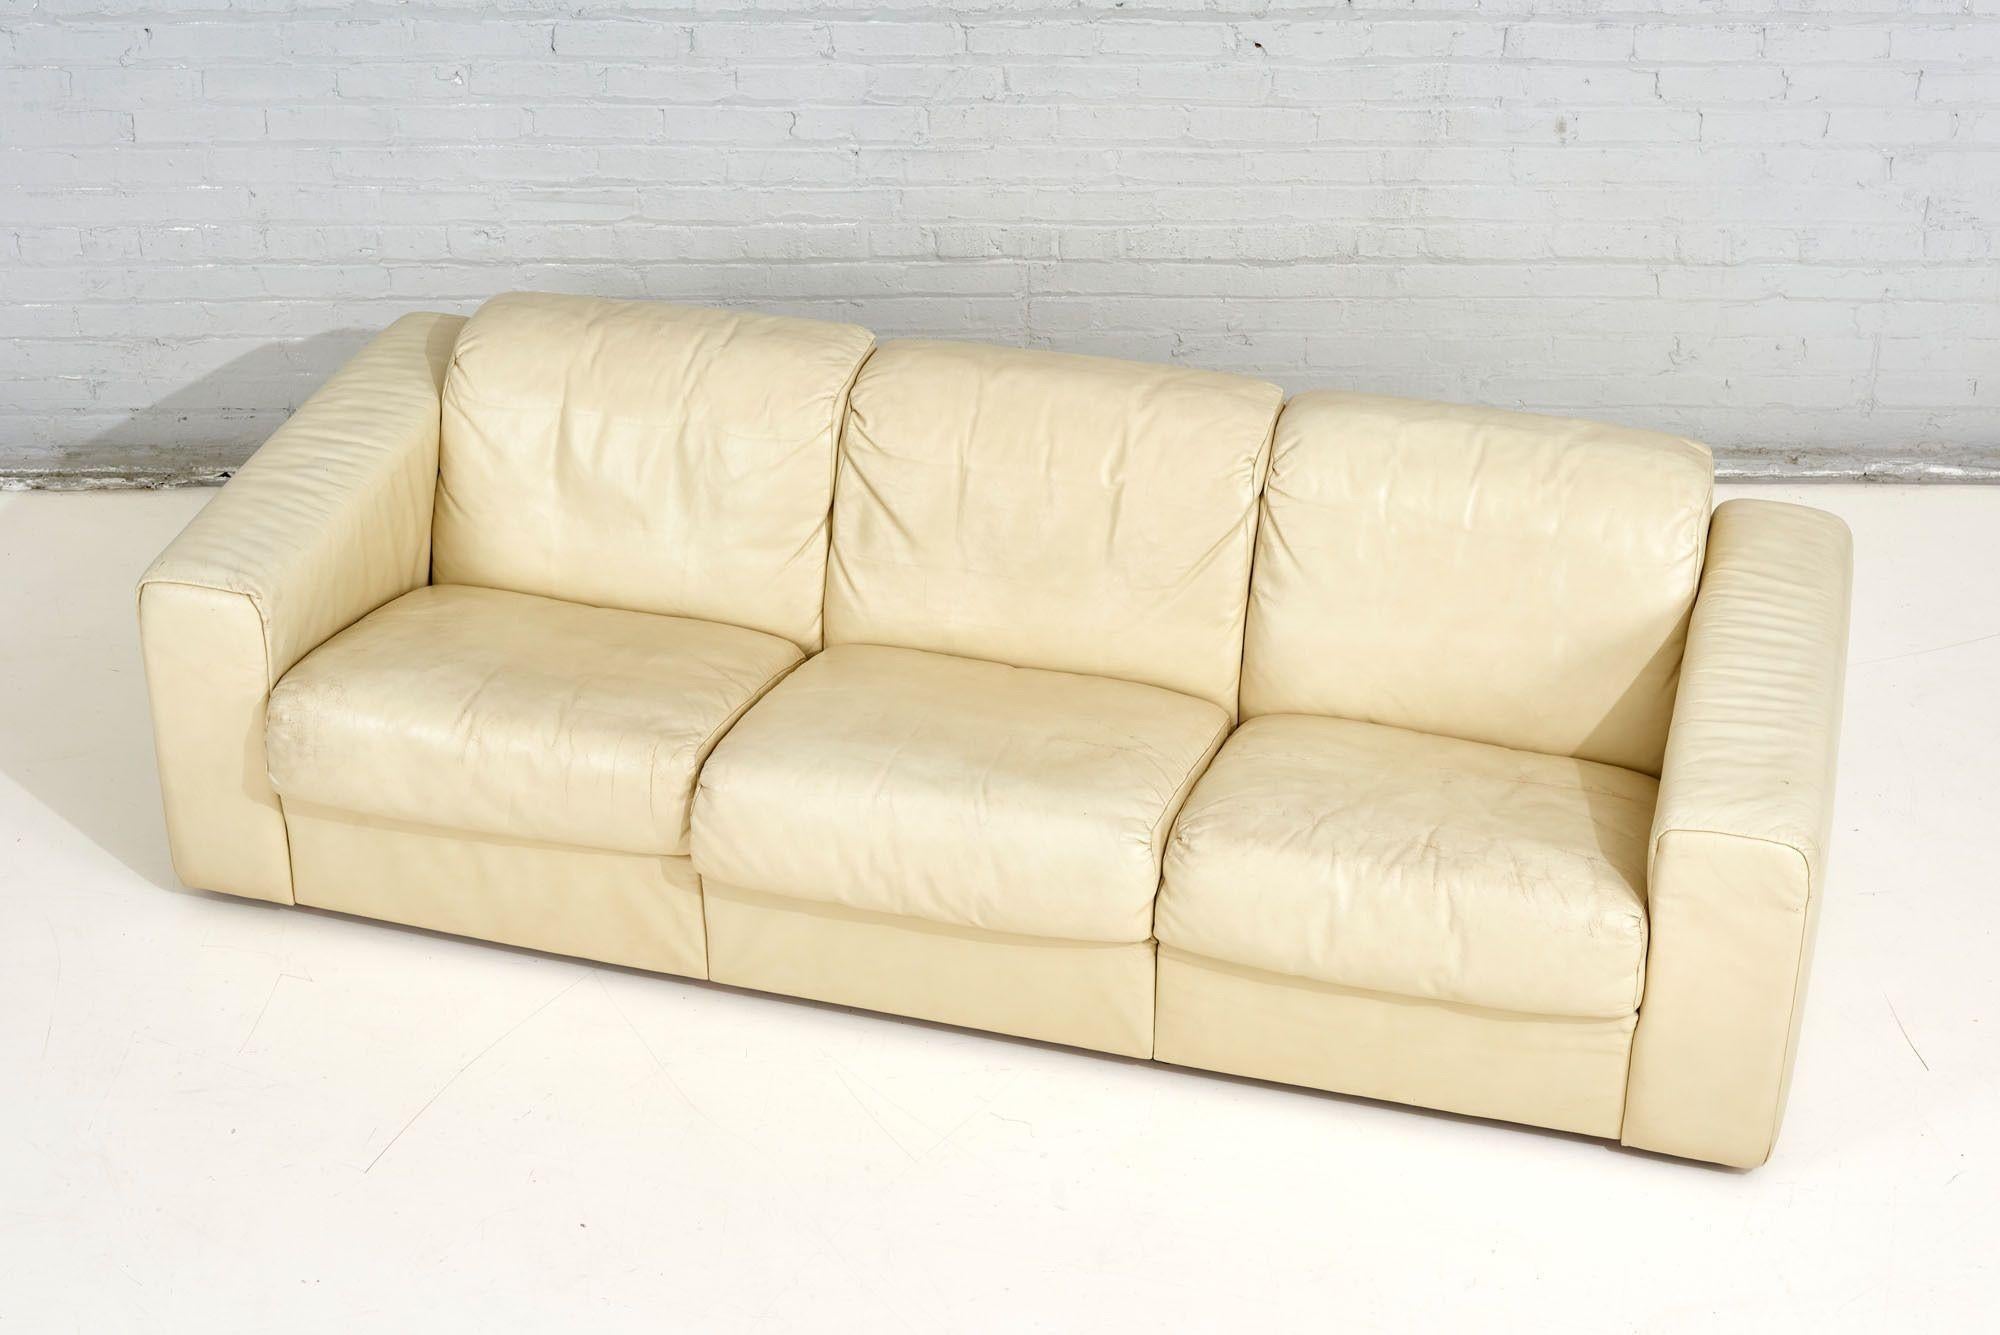 Baron Sofa by Robert Haussmann for Stendig, Cream Leather, 1970 In Good Condition For Sale In Chicago, IL